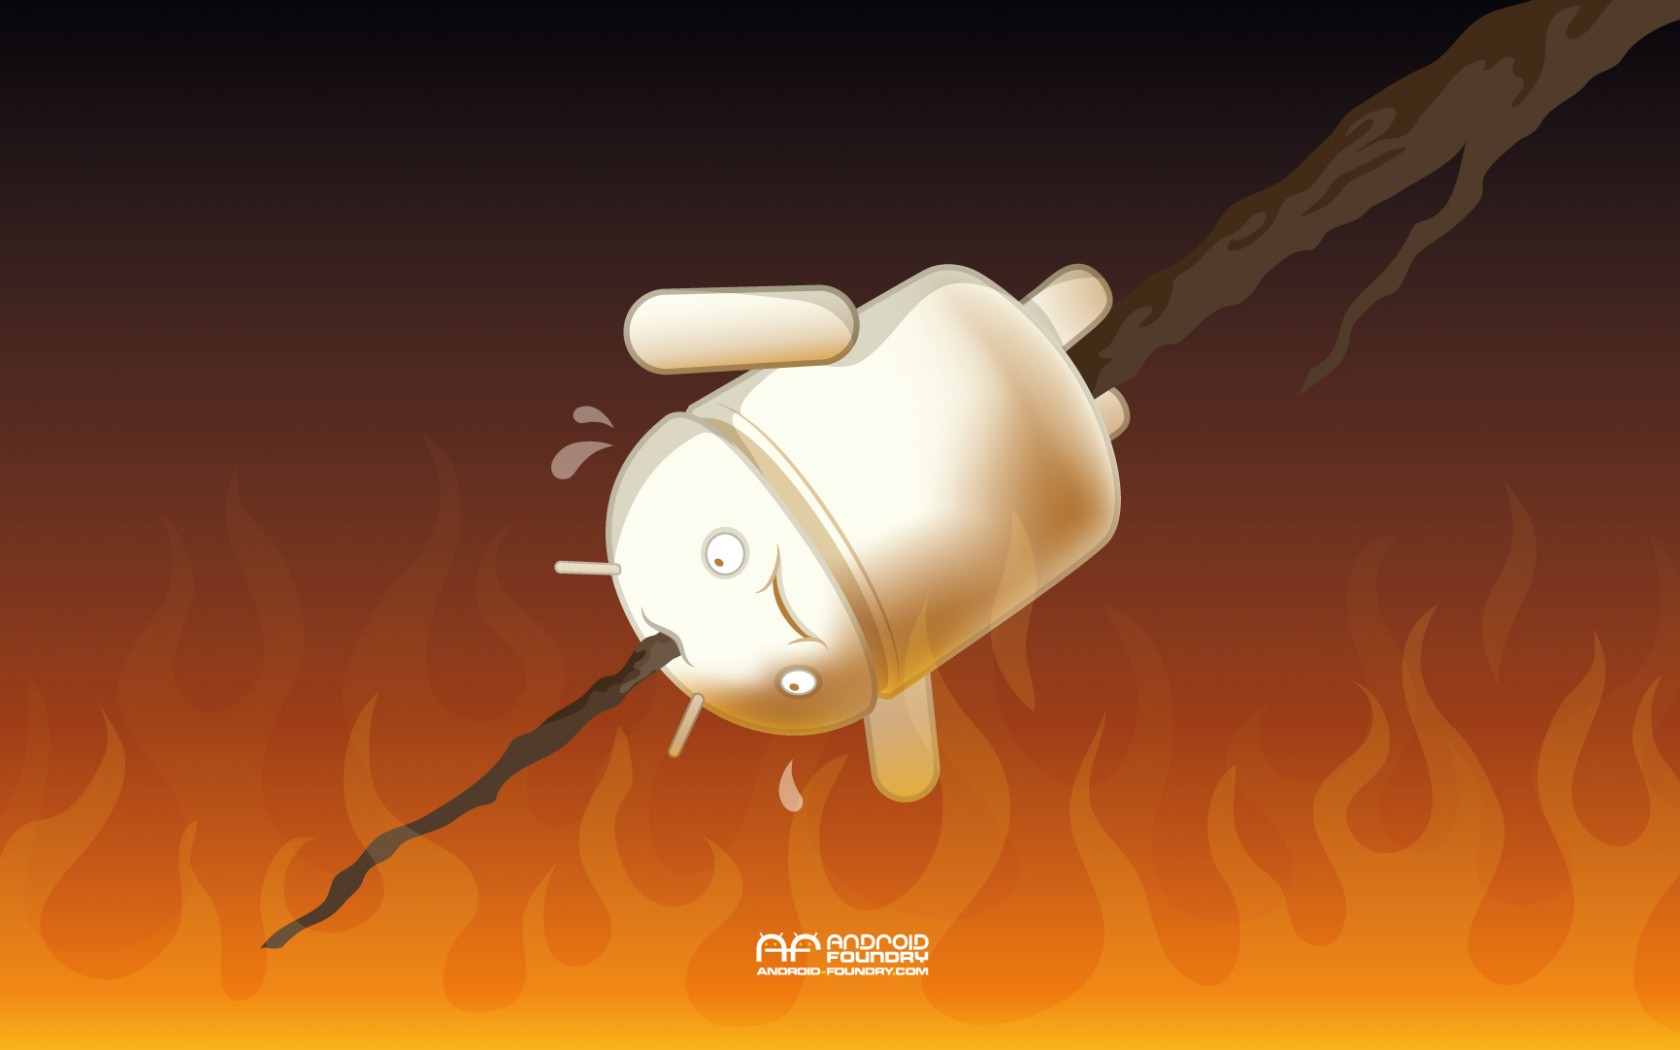 Wallpaper National Marshmallow Toasting Day Android Foundry